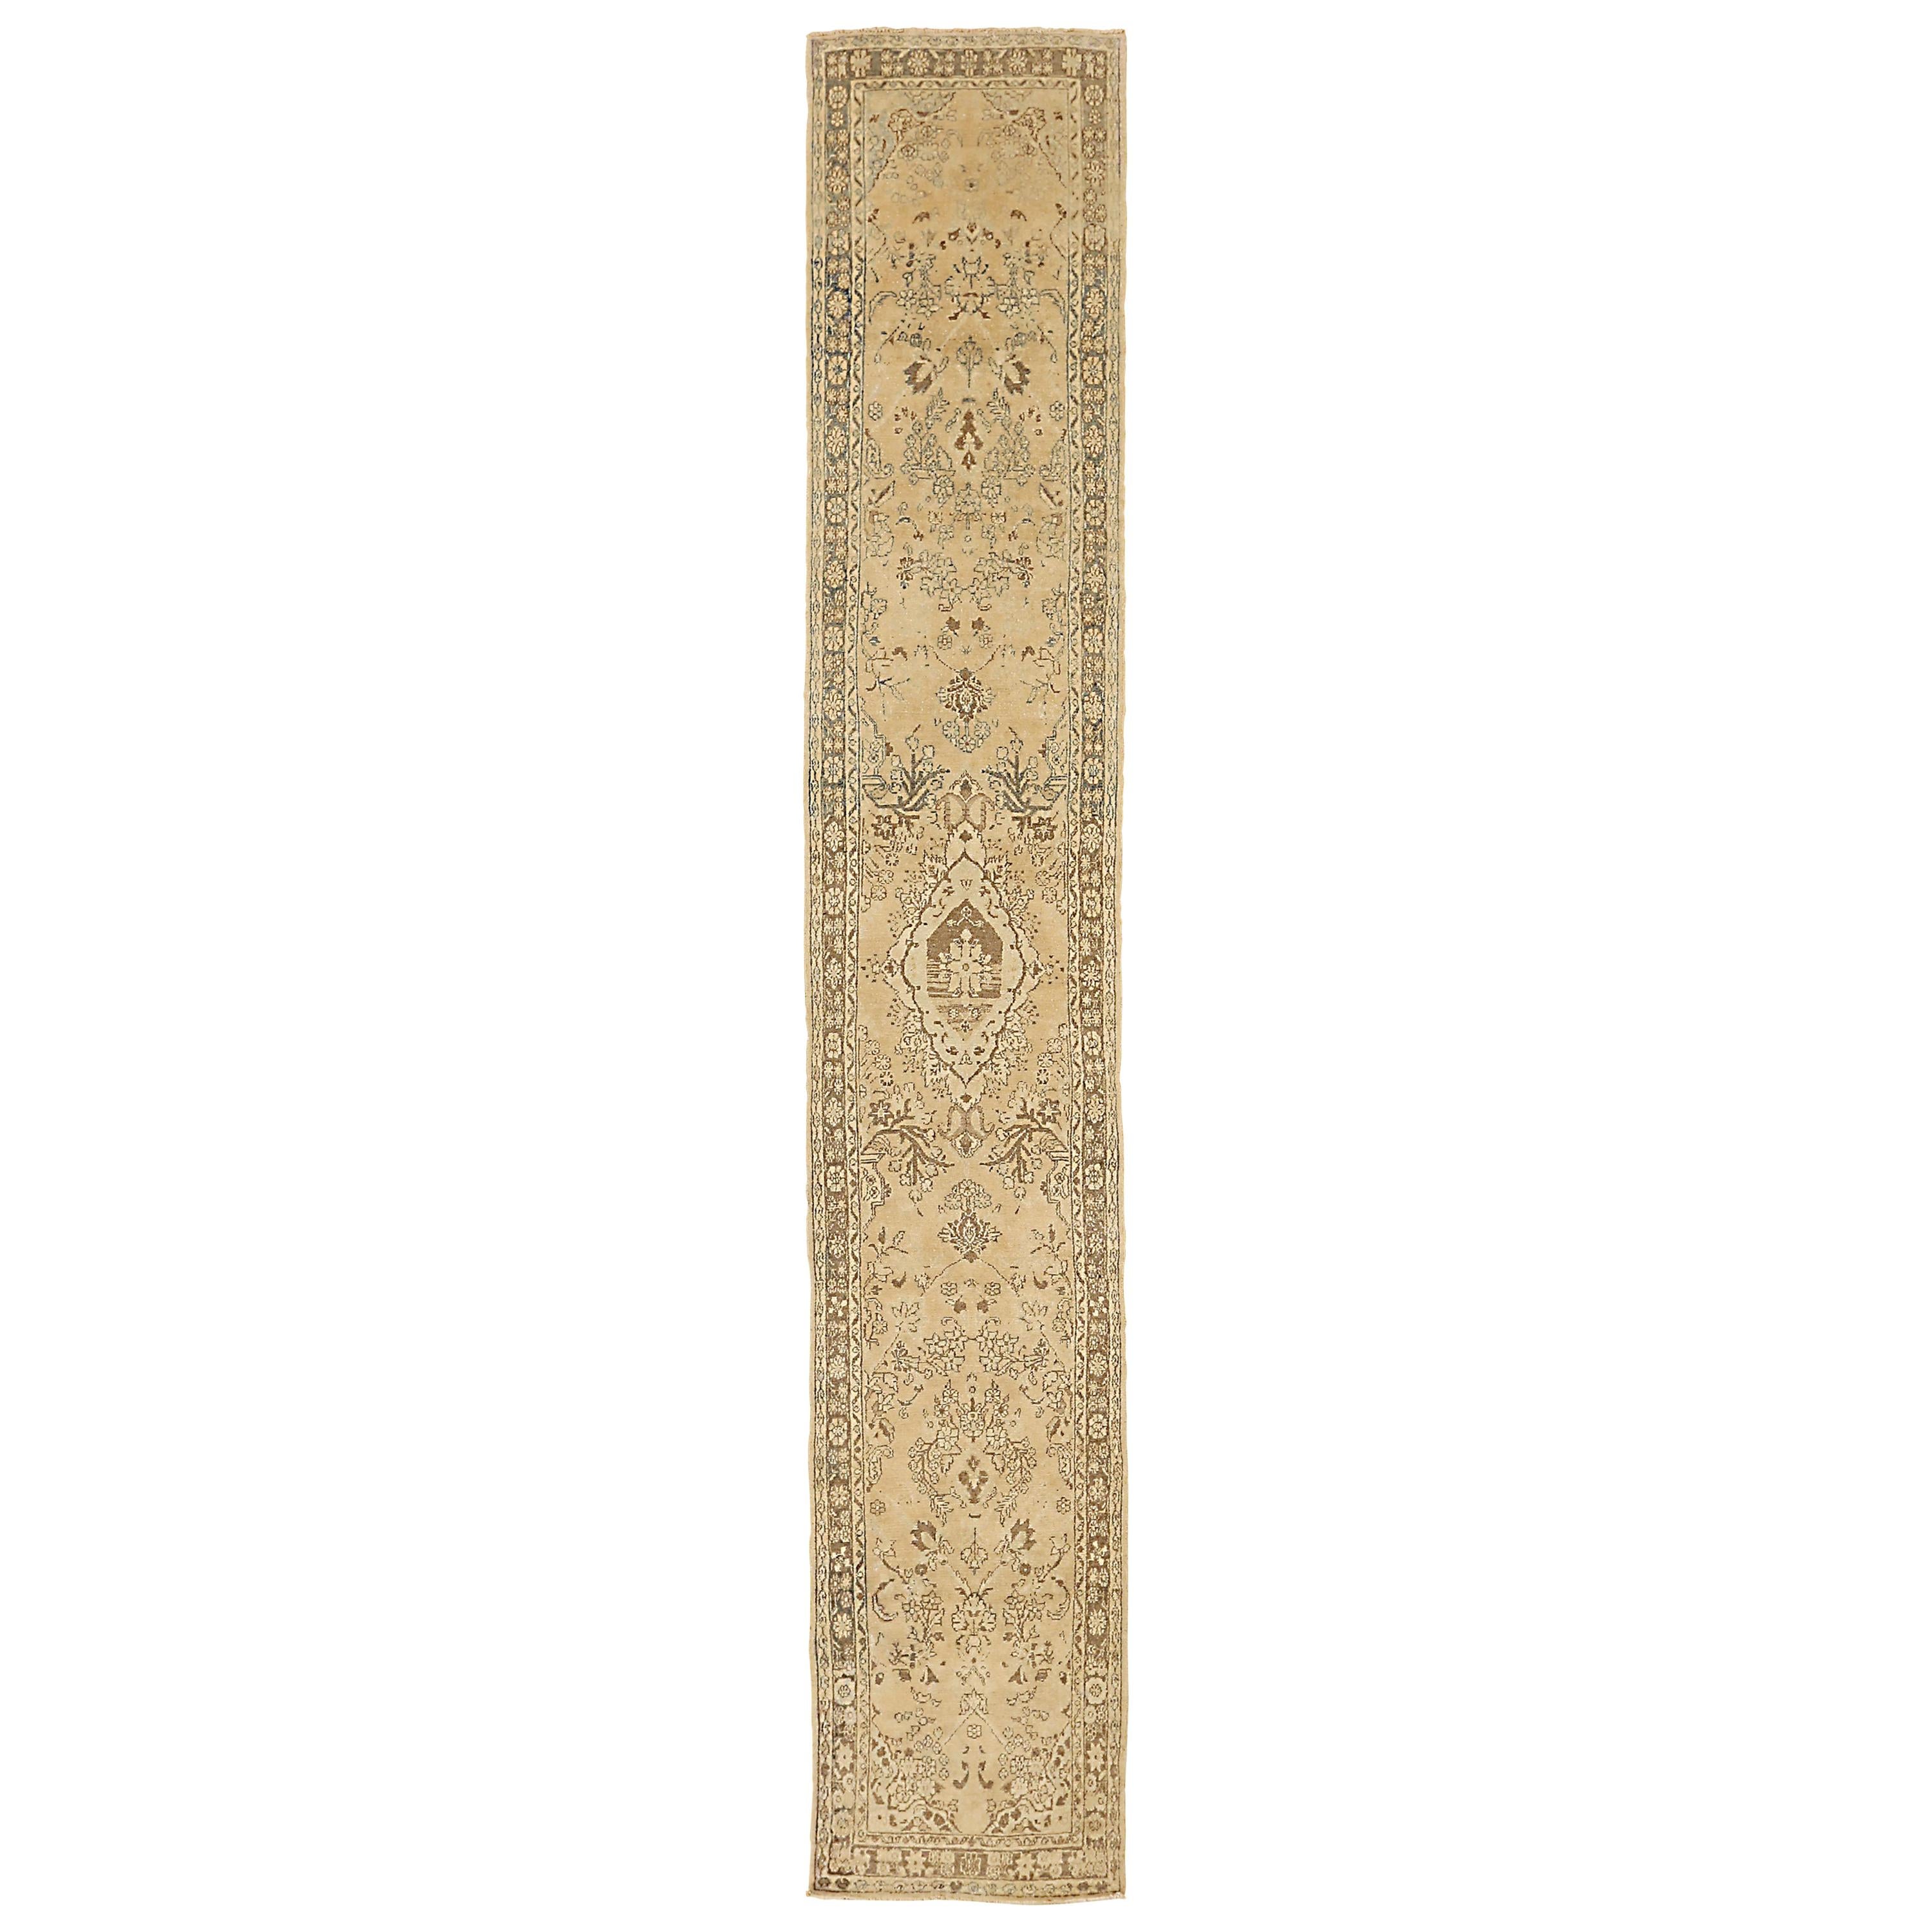 Antique Persian Hamadan Runner Rug with Brown and Ivory Floral Details